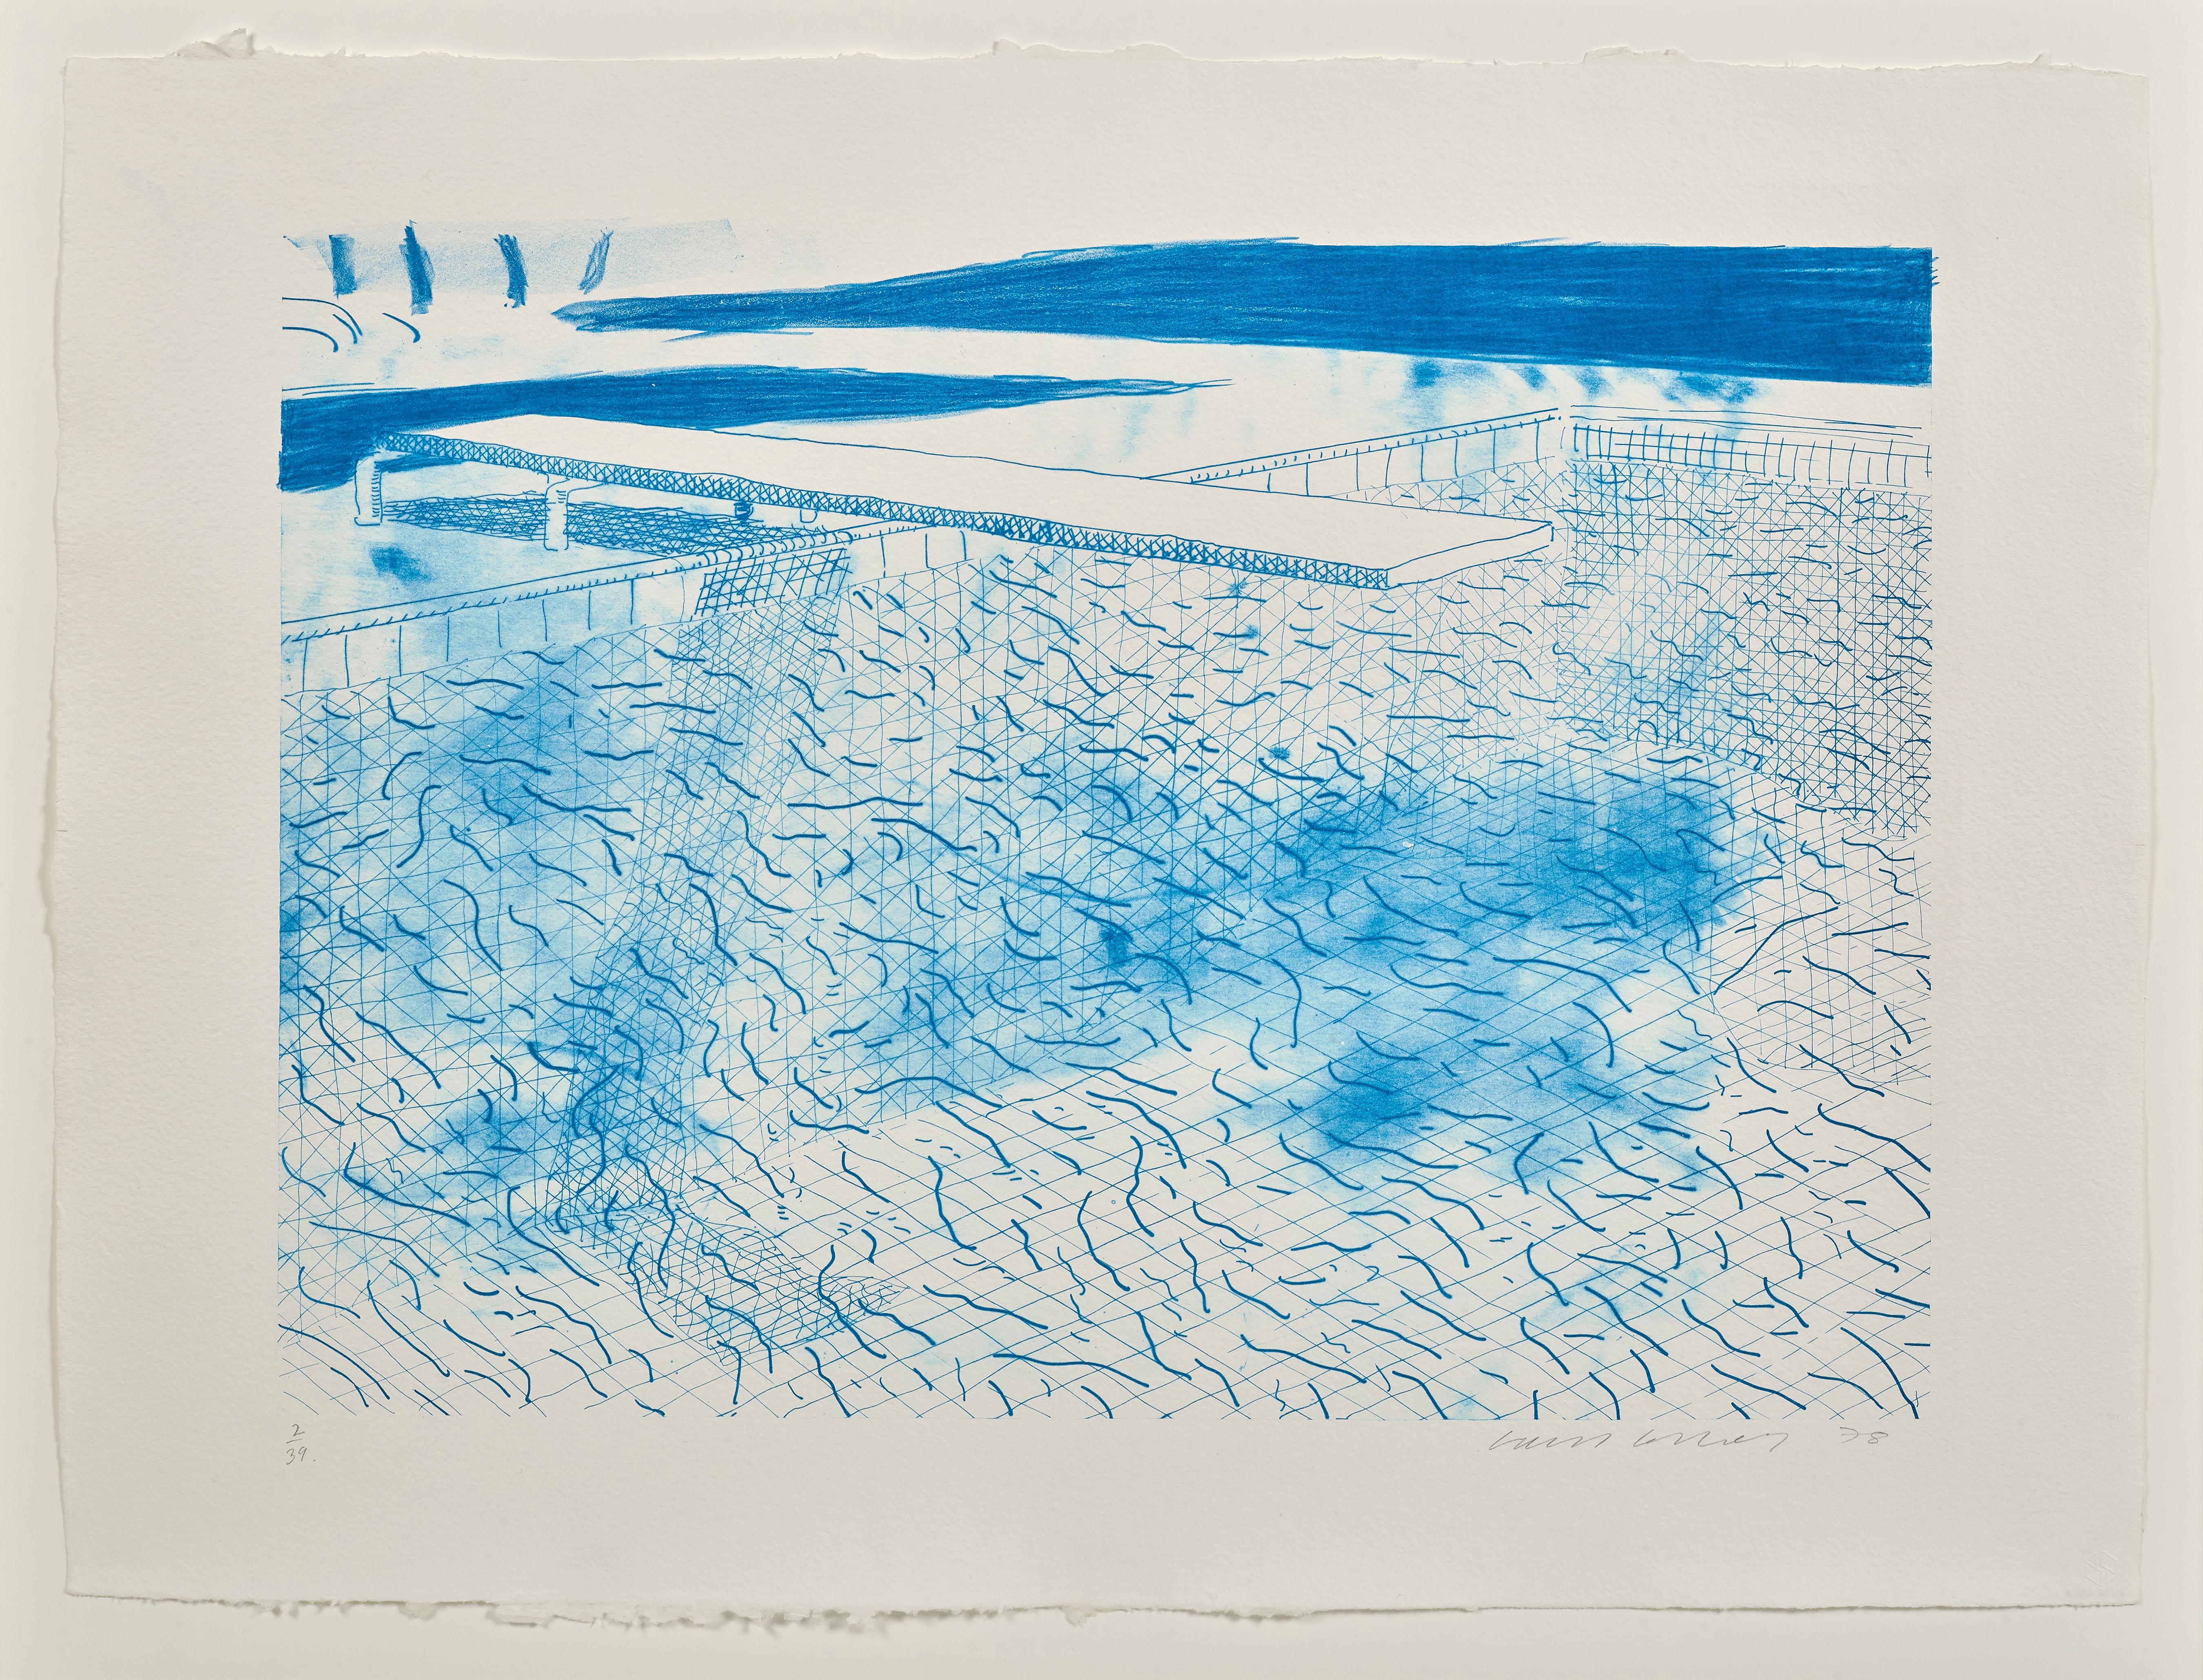 Lithograph of Water Made of Lines, two shades of cyan blue, 1978 - Print by David Hockney